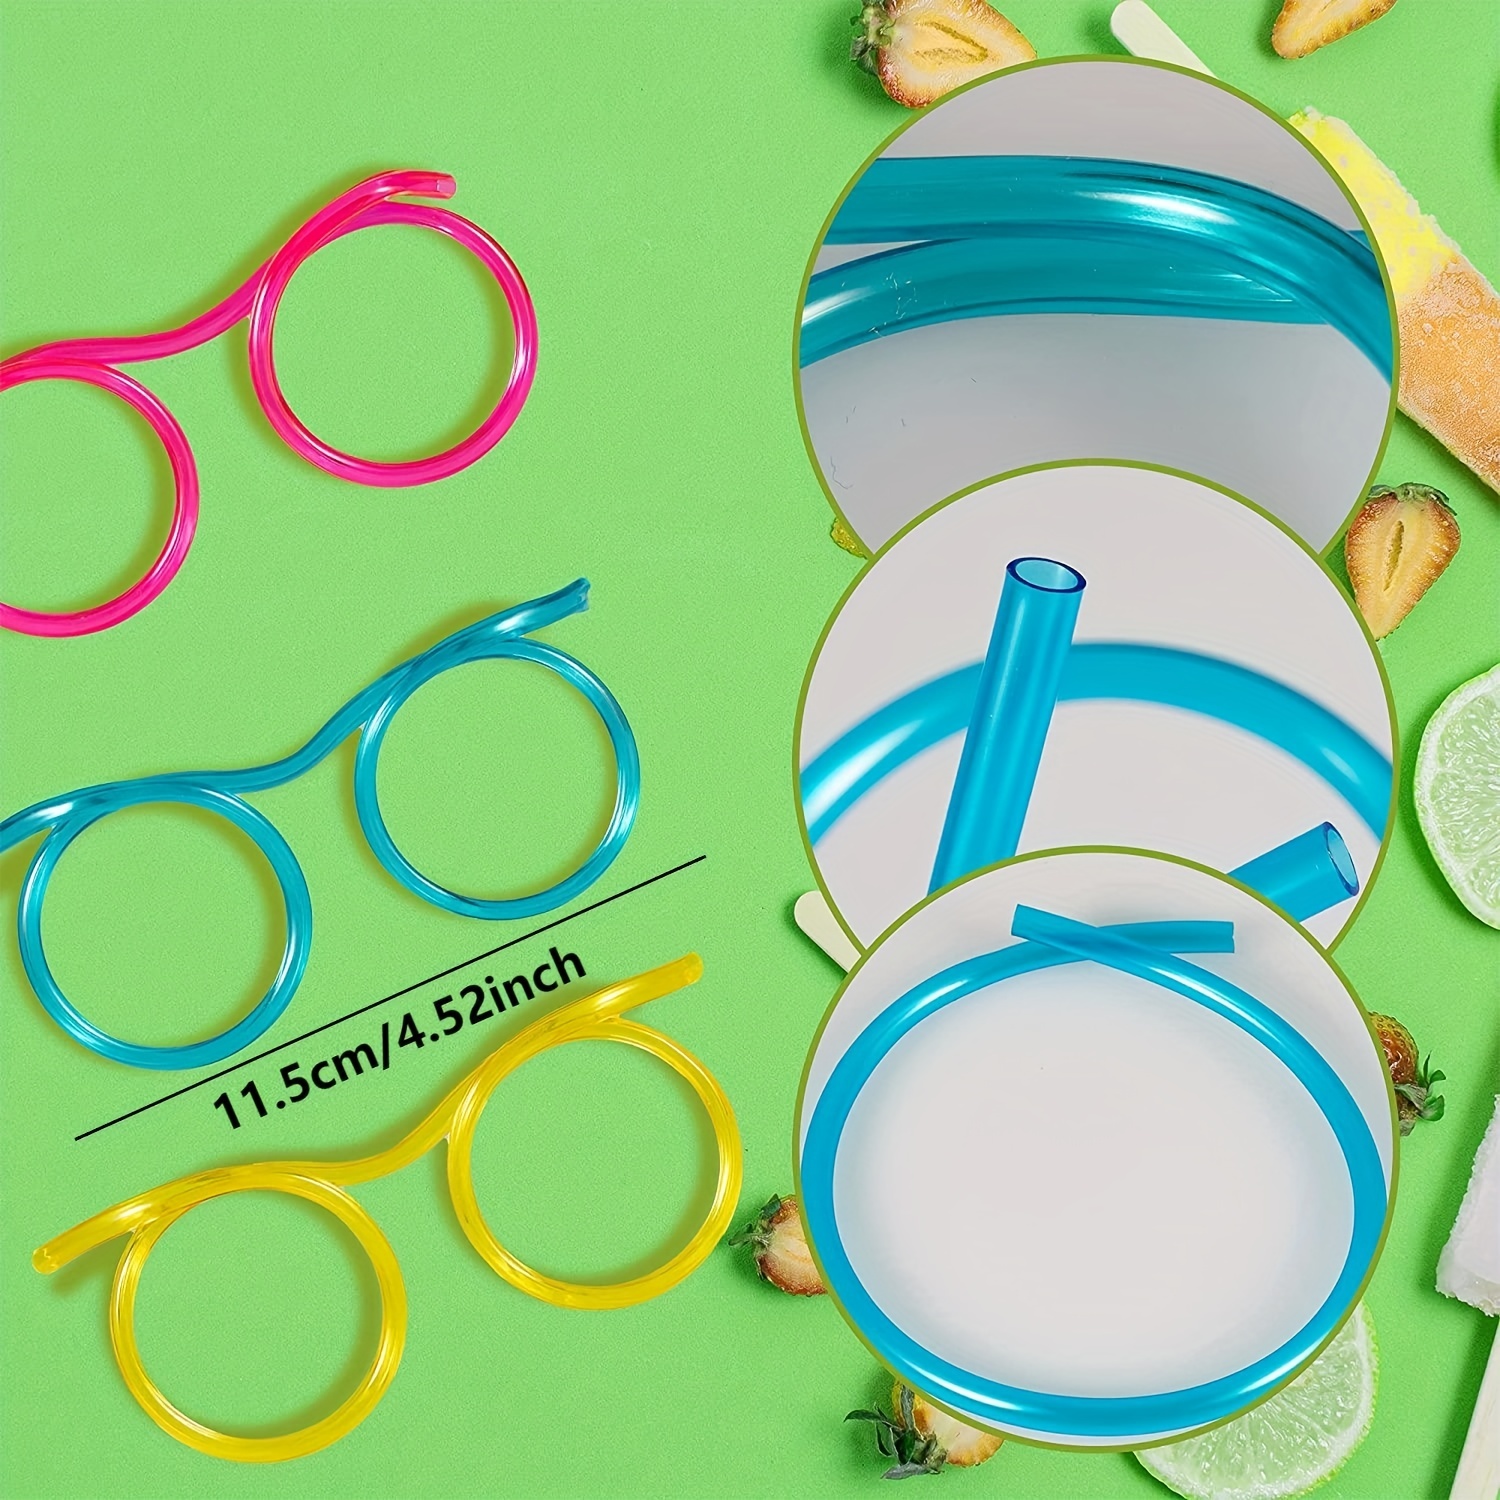 4-Pack of Drinking Straw Glasses